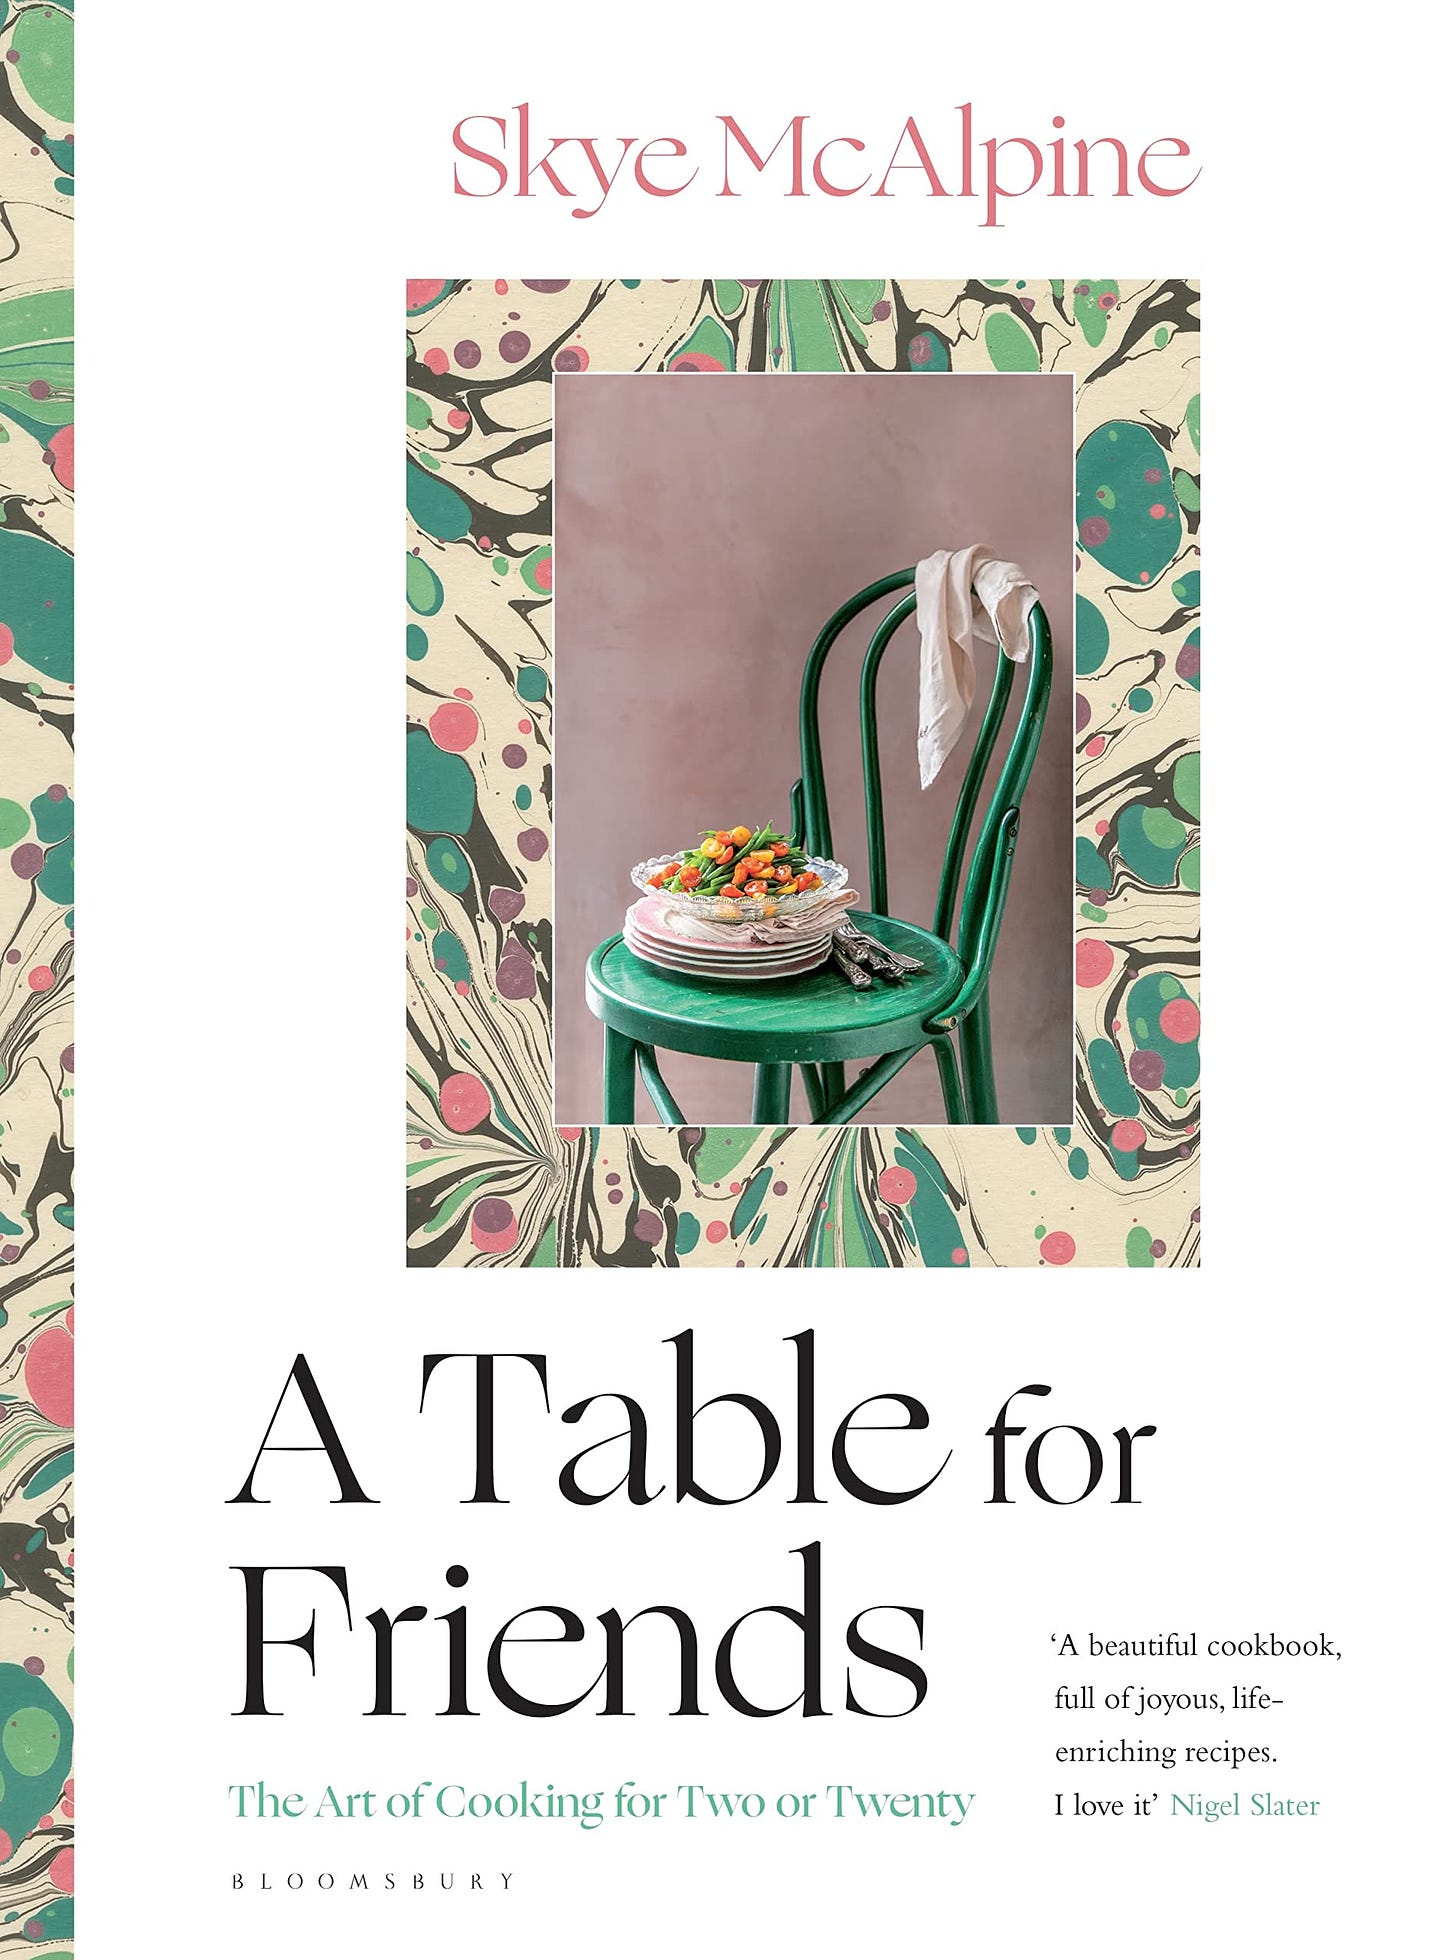 A Table for Friends: The Art of Cooking for Two or Twenty: Amazon.co.uk:  McAlpine, Skye: 9781526615114: Books